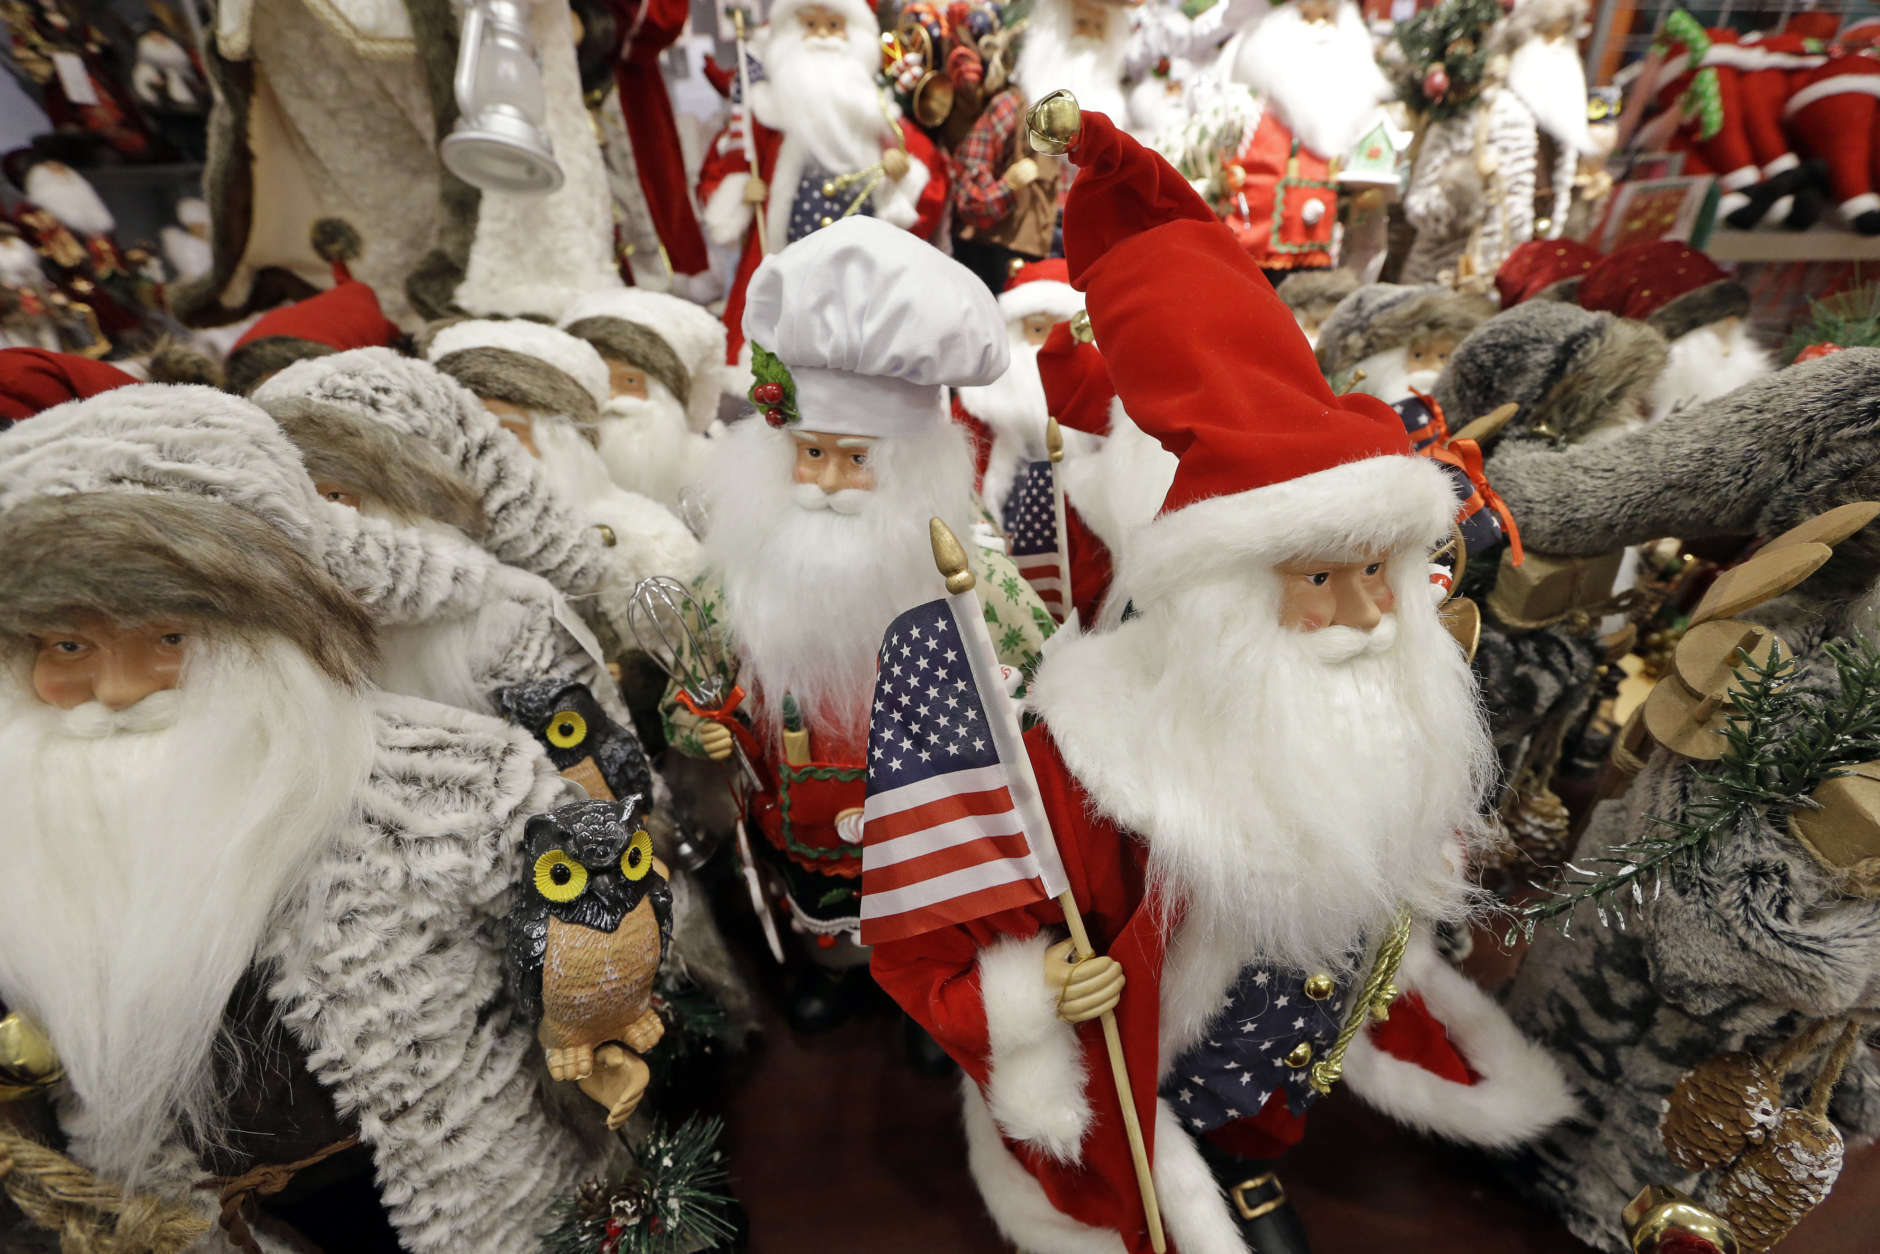 Santa figures, some carrying American flags, are lined-up for sale at a J.C. Penney store, Friday, Nov. 24, 2017, in Seattle. Black Friday has morphed from a single day when people got up early to score doorbusters into a whole season of deals, so shoppers may feel less need to be out. (AP Photo/Elaine Thompson)